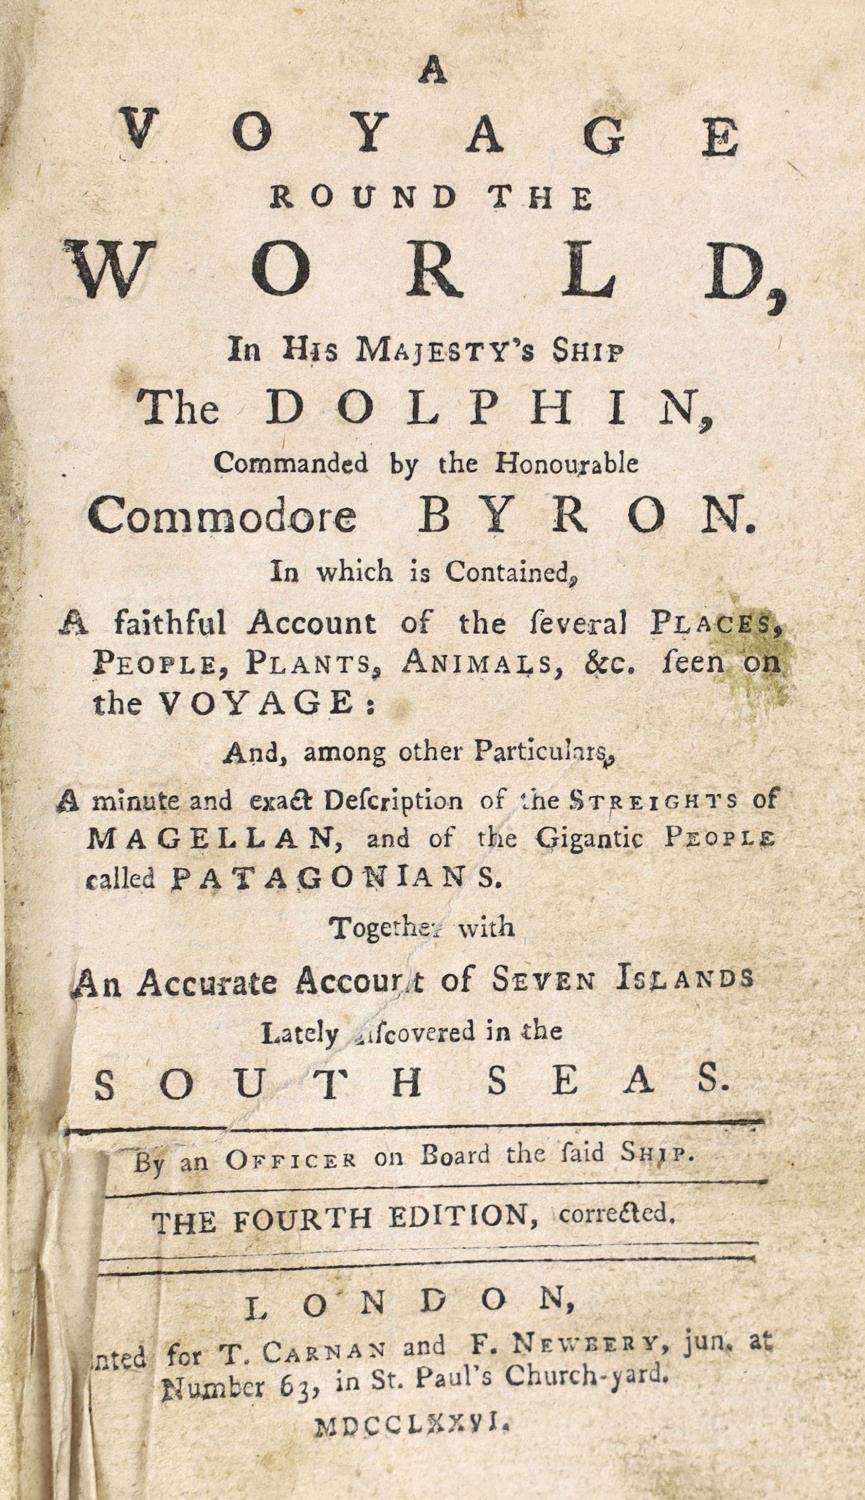 ° ° Byron, John (1723-1786); Clerke, Charles (attributed to) - A Voyage Round the World, in His